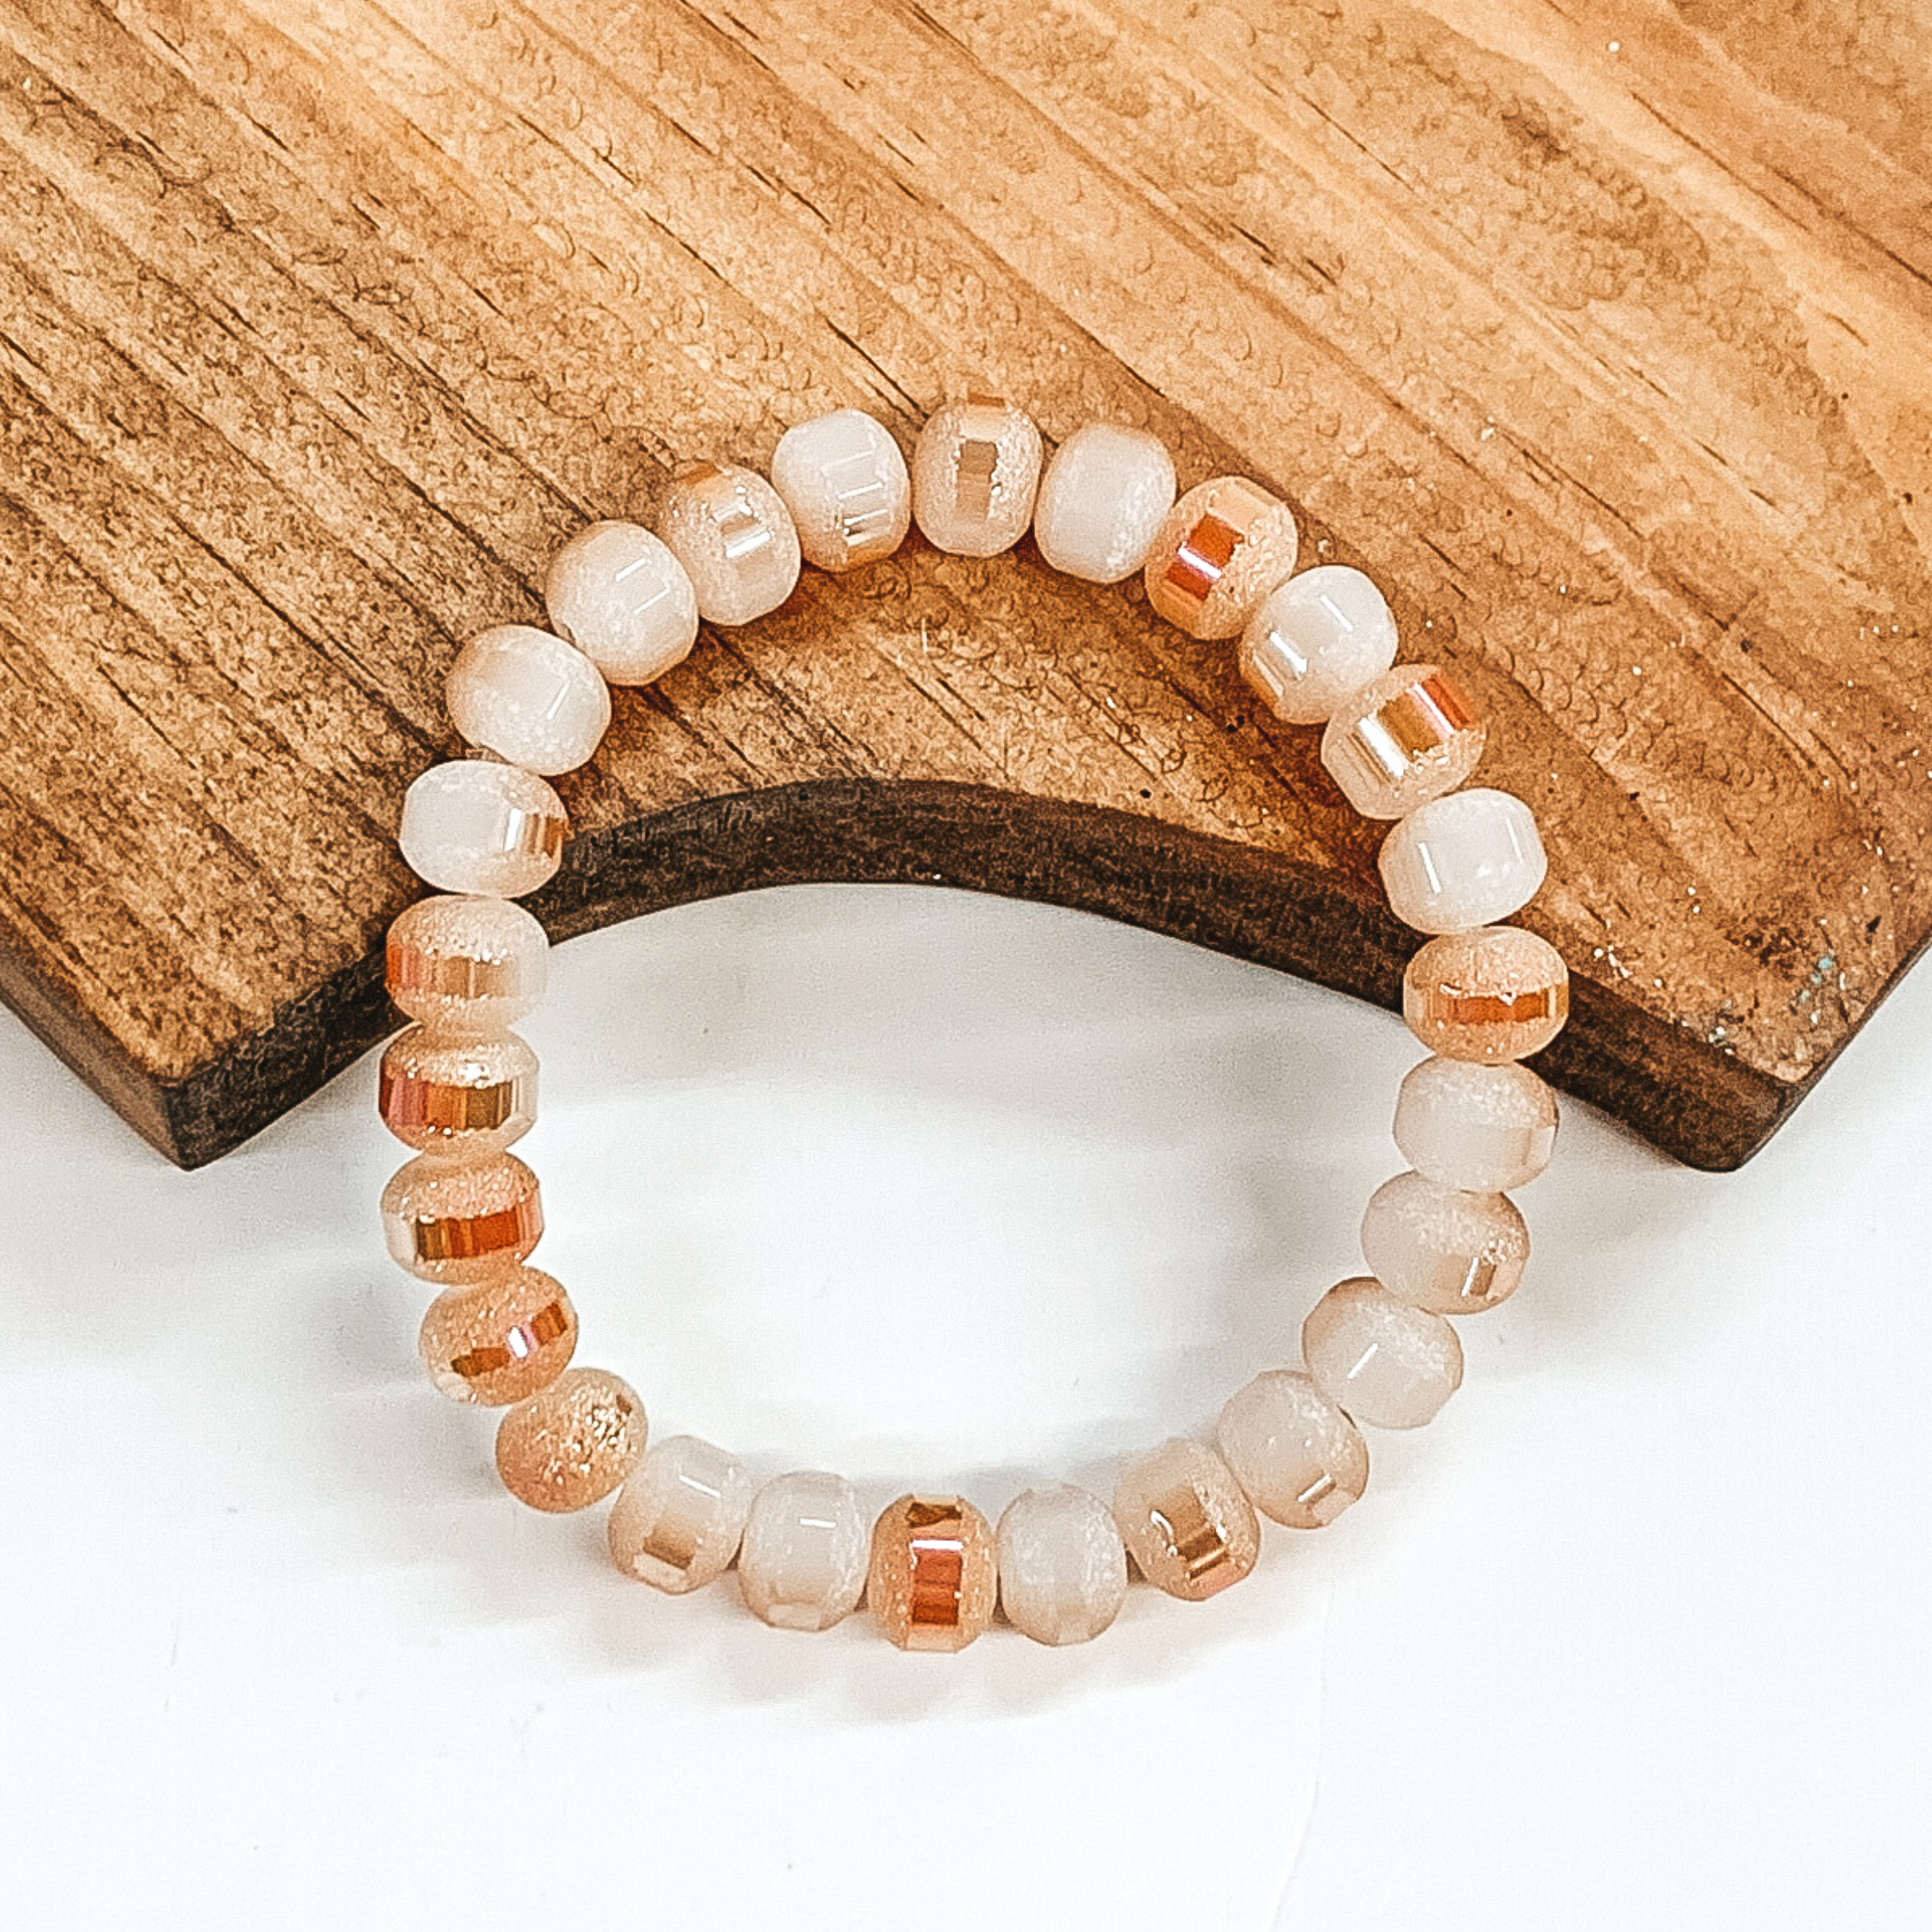 Crystal beaded bracelet in light pink and tan. This bracelet is pictured on a partially laying on a brown block on a white background.